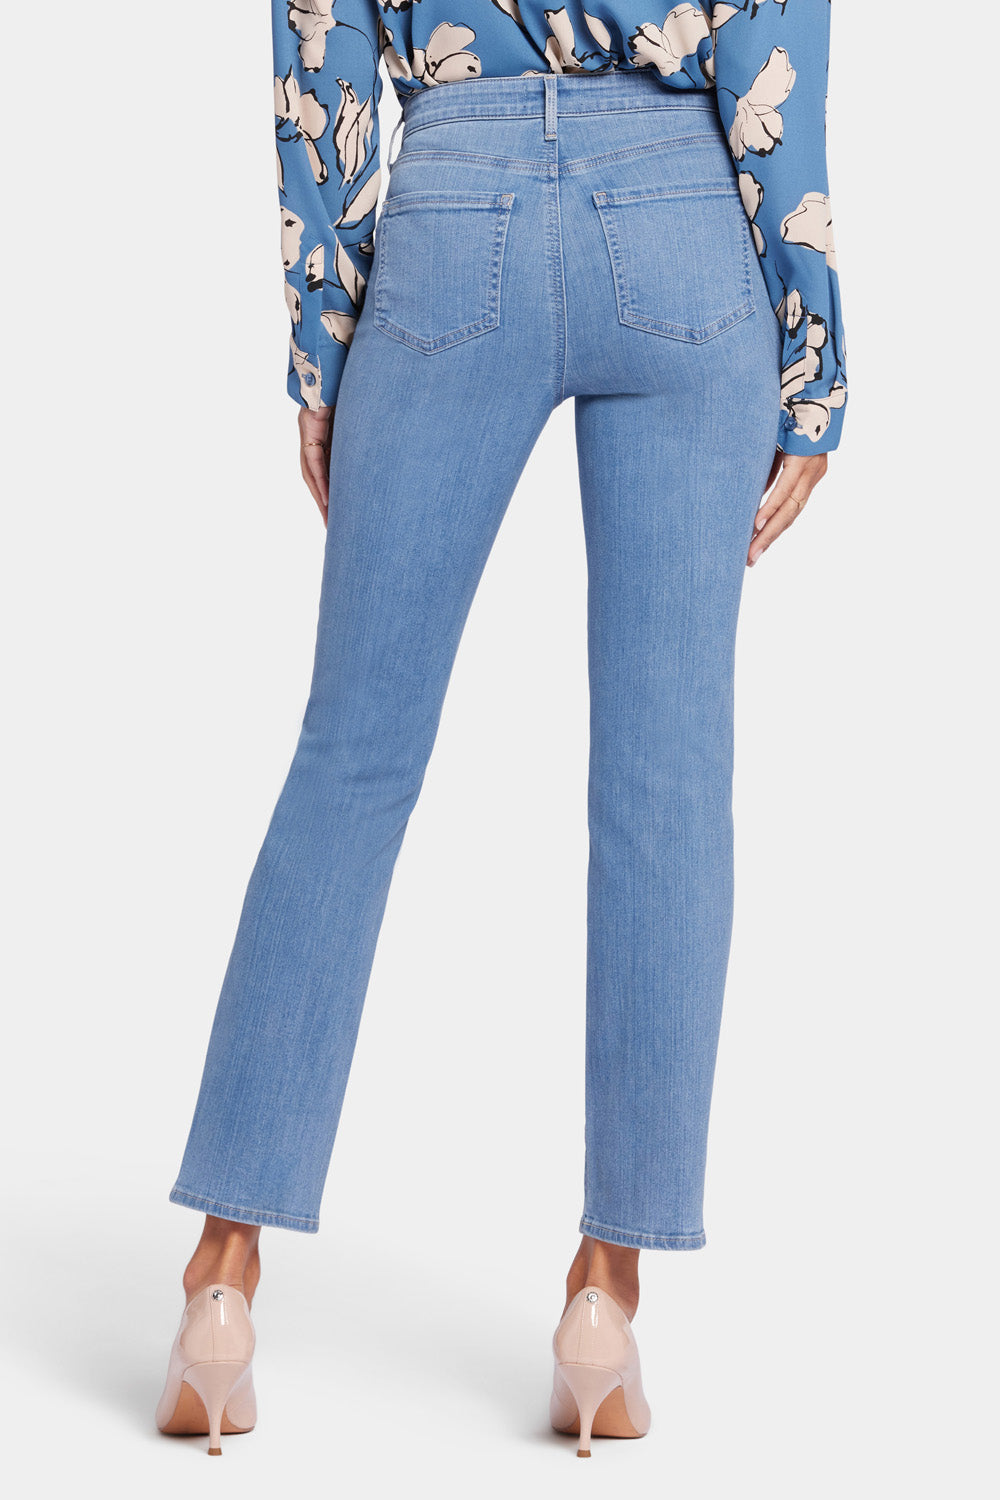 NYDJ Sheri Slim Jeans With High Rise - Nottinghill